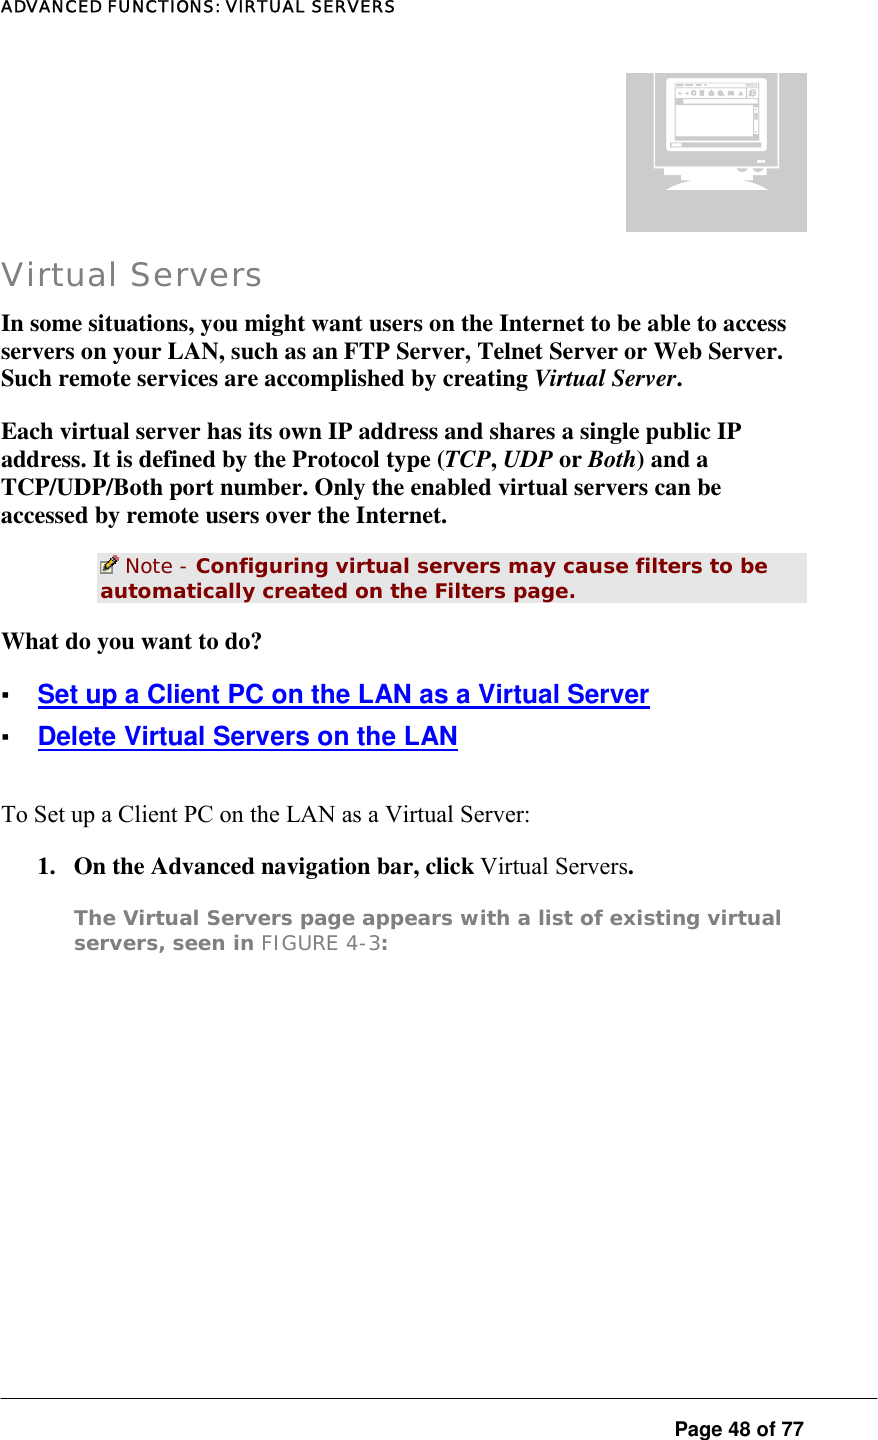 ADVANCED FUNCTIONS: VIRTUAL SERVERS  Page 48 of 77 Virtual Servers In some situations, you might want users on the Internet to be able to access servers on your LAN, such as an FTP Server, Telnet Server or Web Server. Such remote services are accomplished by creating Virtual Server.  Each virtual server has its own IP address and shares a single public IP address. It is defined by the Protocol type (TCP, UDP or Both) and a TCP/UDP/Both port number. Only the enabled virtual servers can be accessed by remote users over the Internet.   Note - Configuring virtual servers may cause filters to be automatically created on the Filters page.  What do you want to do?  ▪ Set up a Client PC on the LAN as a Virtual Server ▪ Delete Virtual Servers on the LAN To Set up a Client PC on the LAN as a Virtual Server:  1.  On the Advanced navigation bar, click Virtual Servers.  The Virtual Servers page appears with a list of existing virtual servers, seen in FIGURE 4-3:  ¡ 